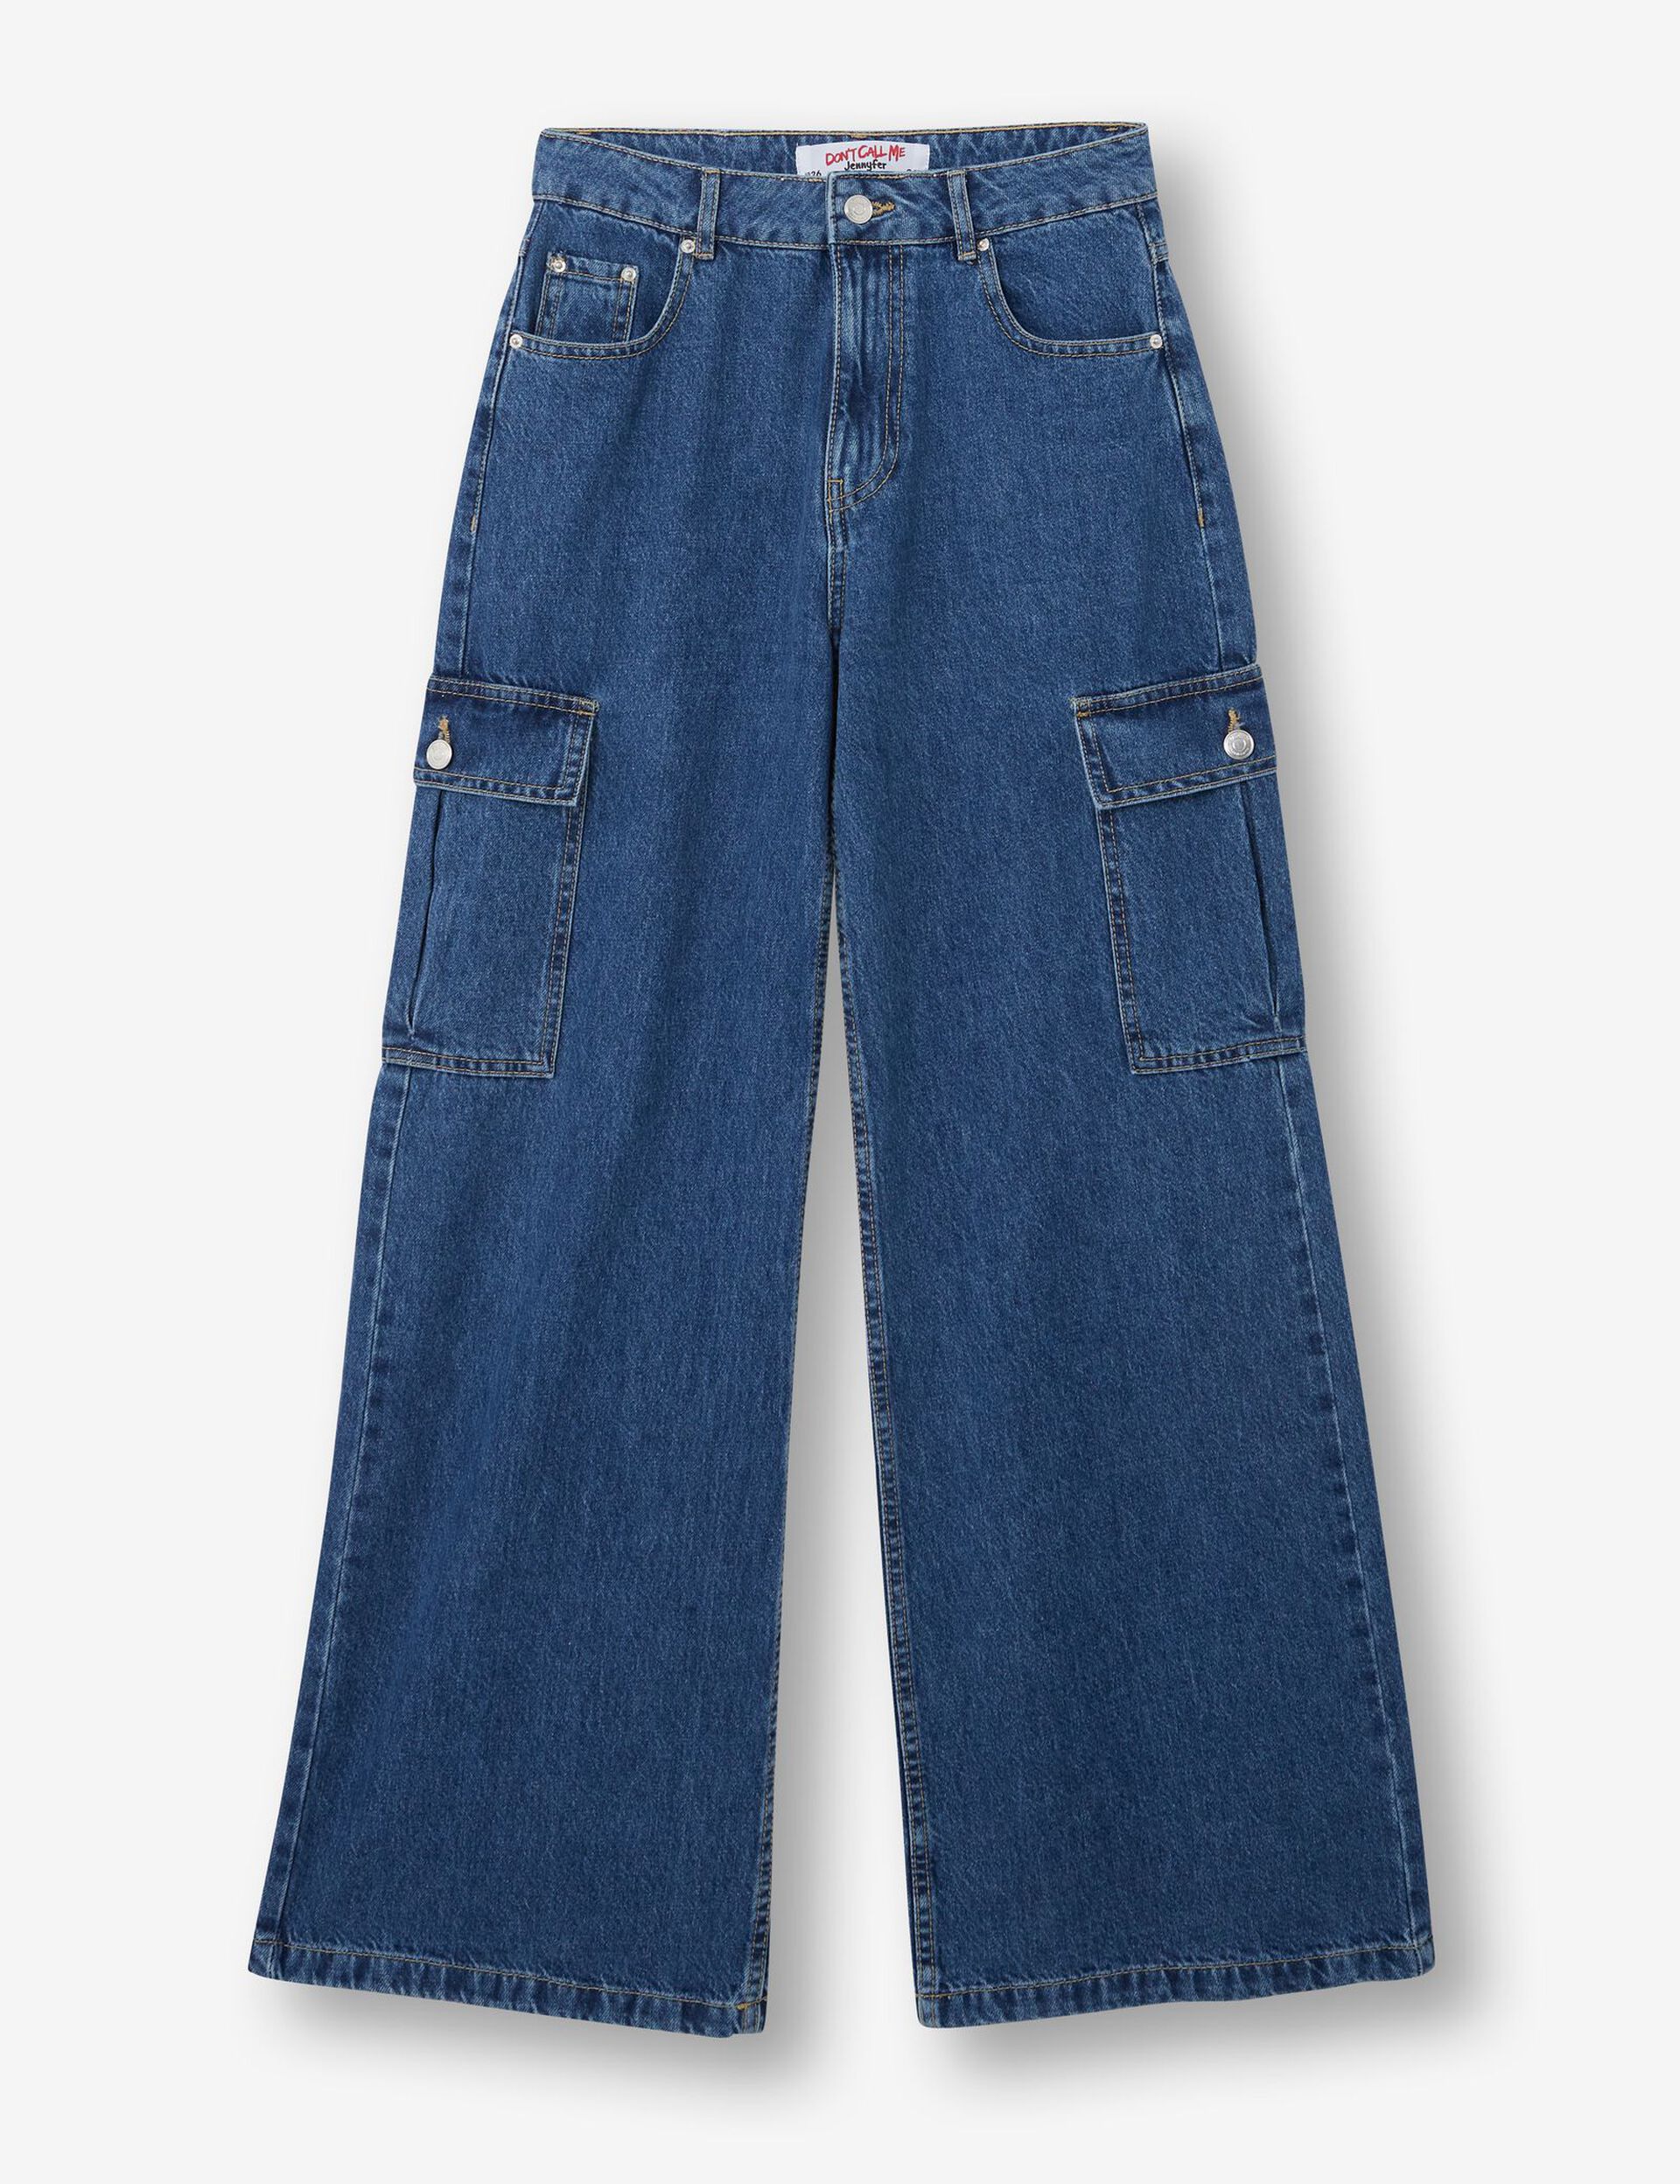 Wide-leg jeans with pockets